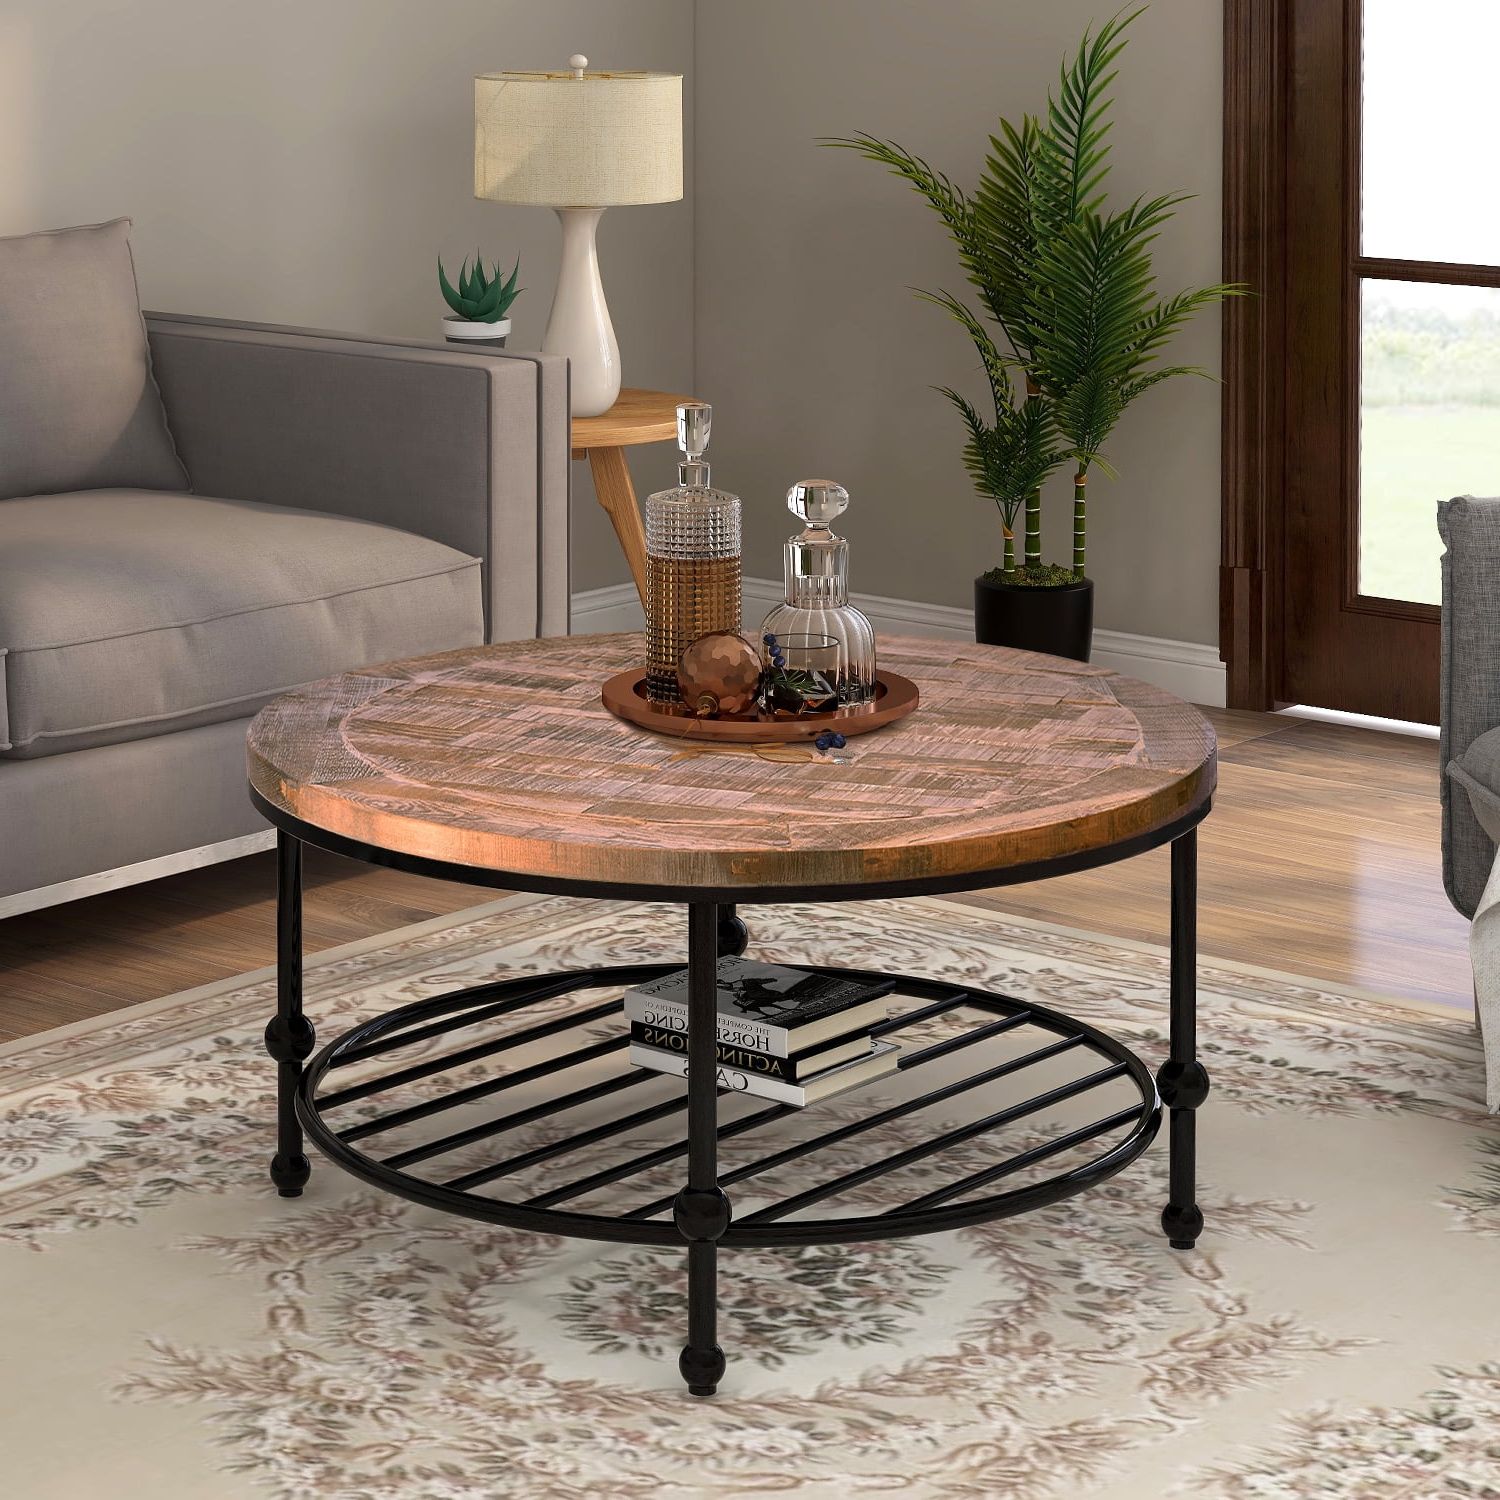 Newest Rustic Natural Round Coffee Table With Storage Shelf For Living Room In Round Coffee Tables (Photo 7 of 15)